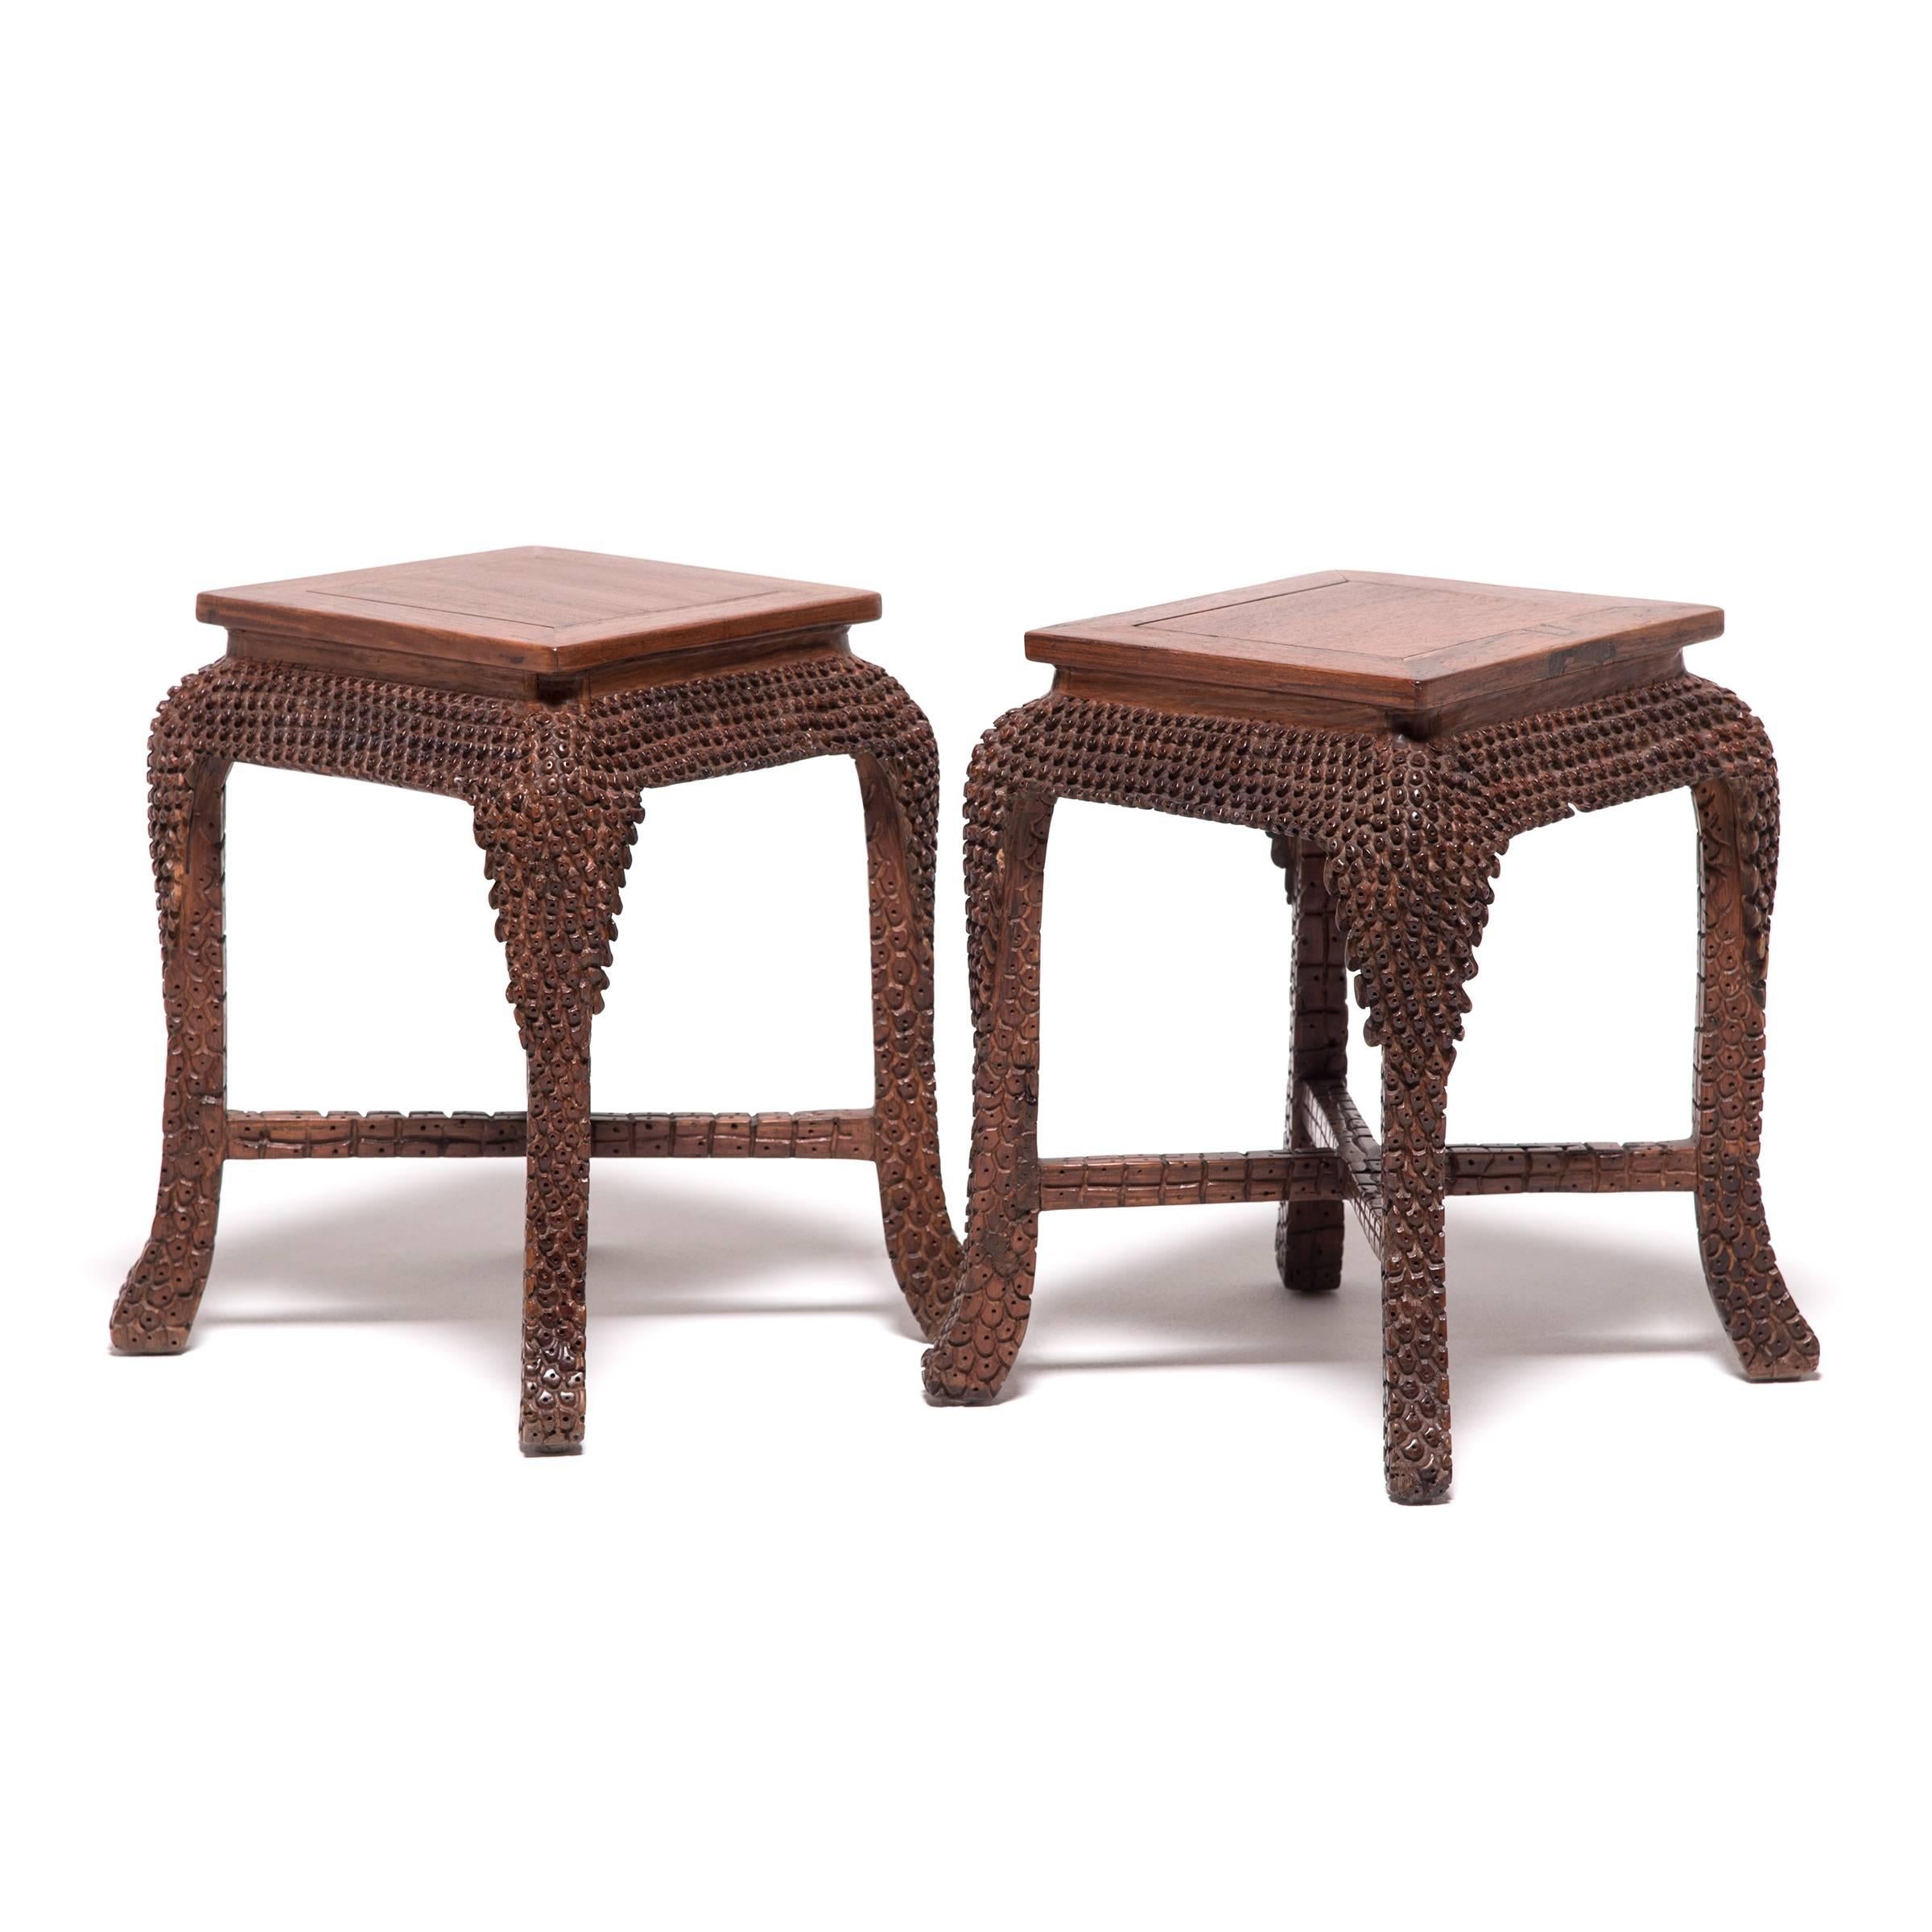 Chinese Dragon Scale Table Set with Square Stools, c. 1900 For Sale 1